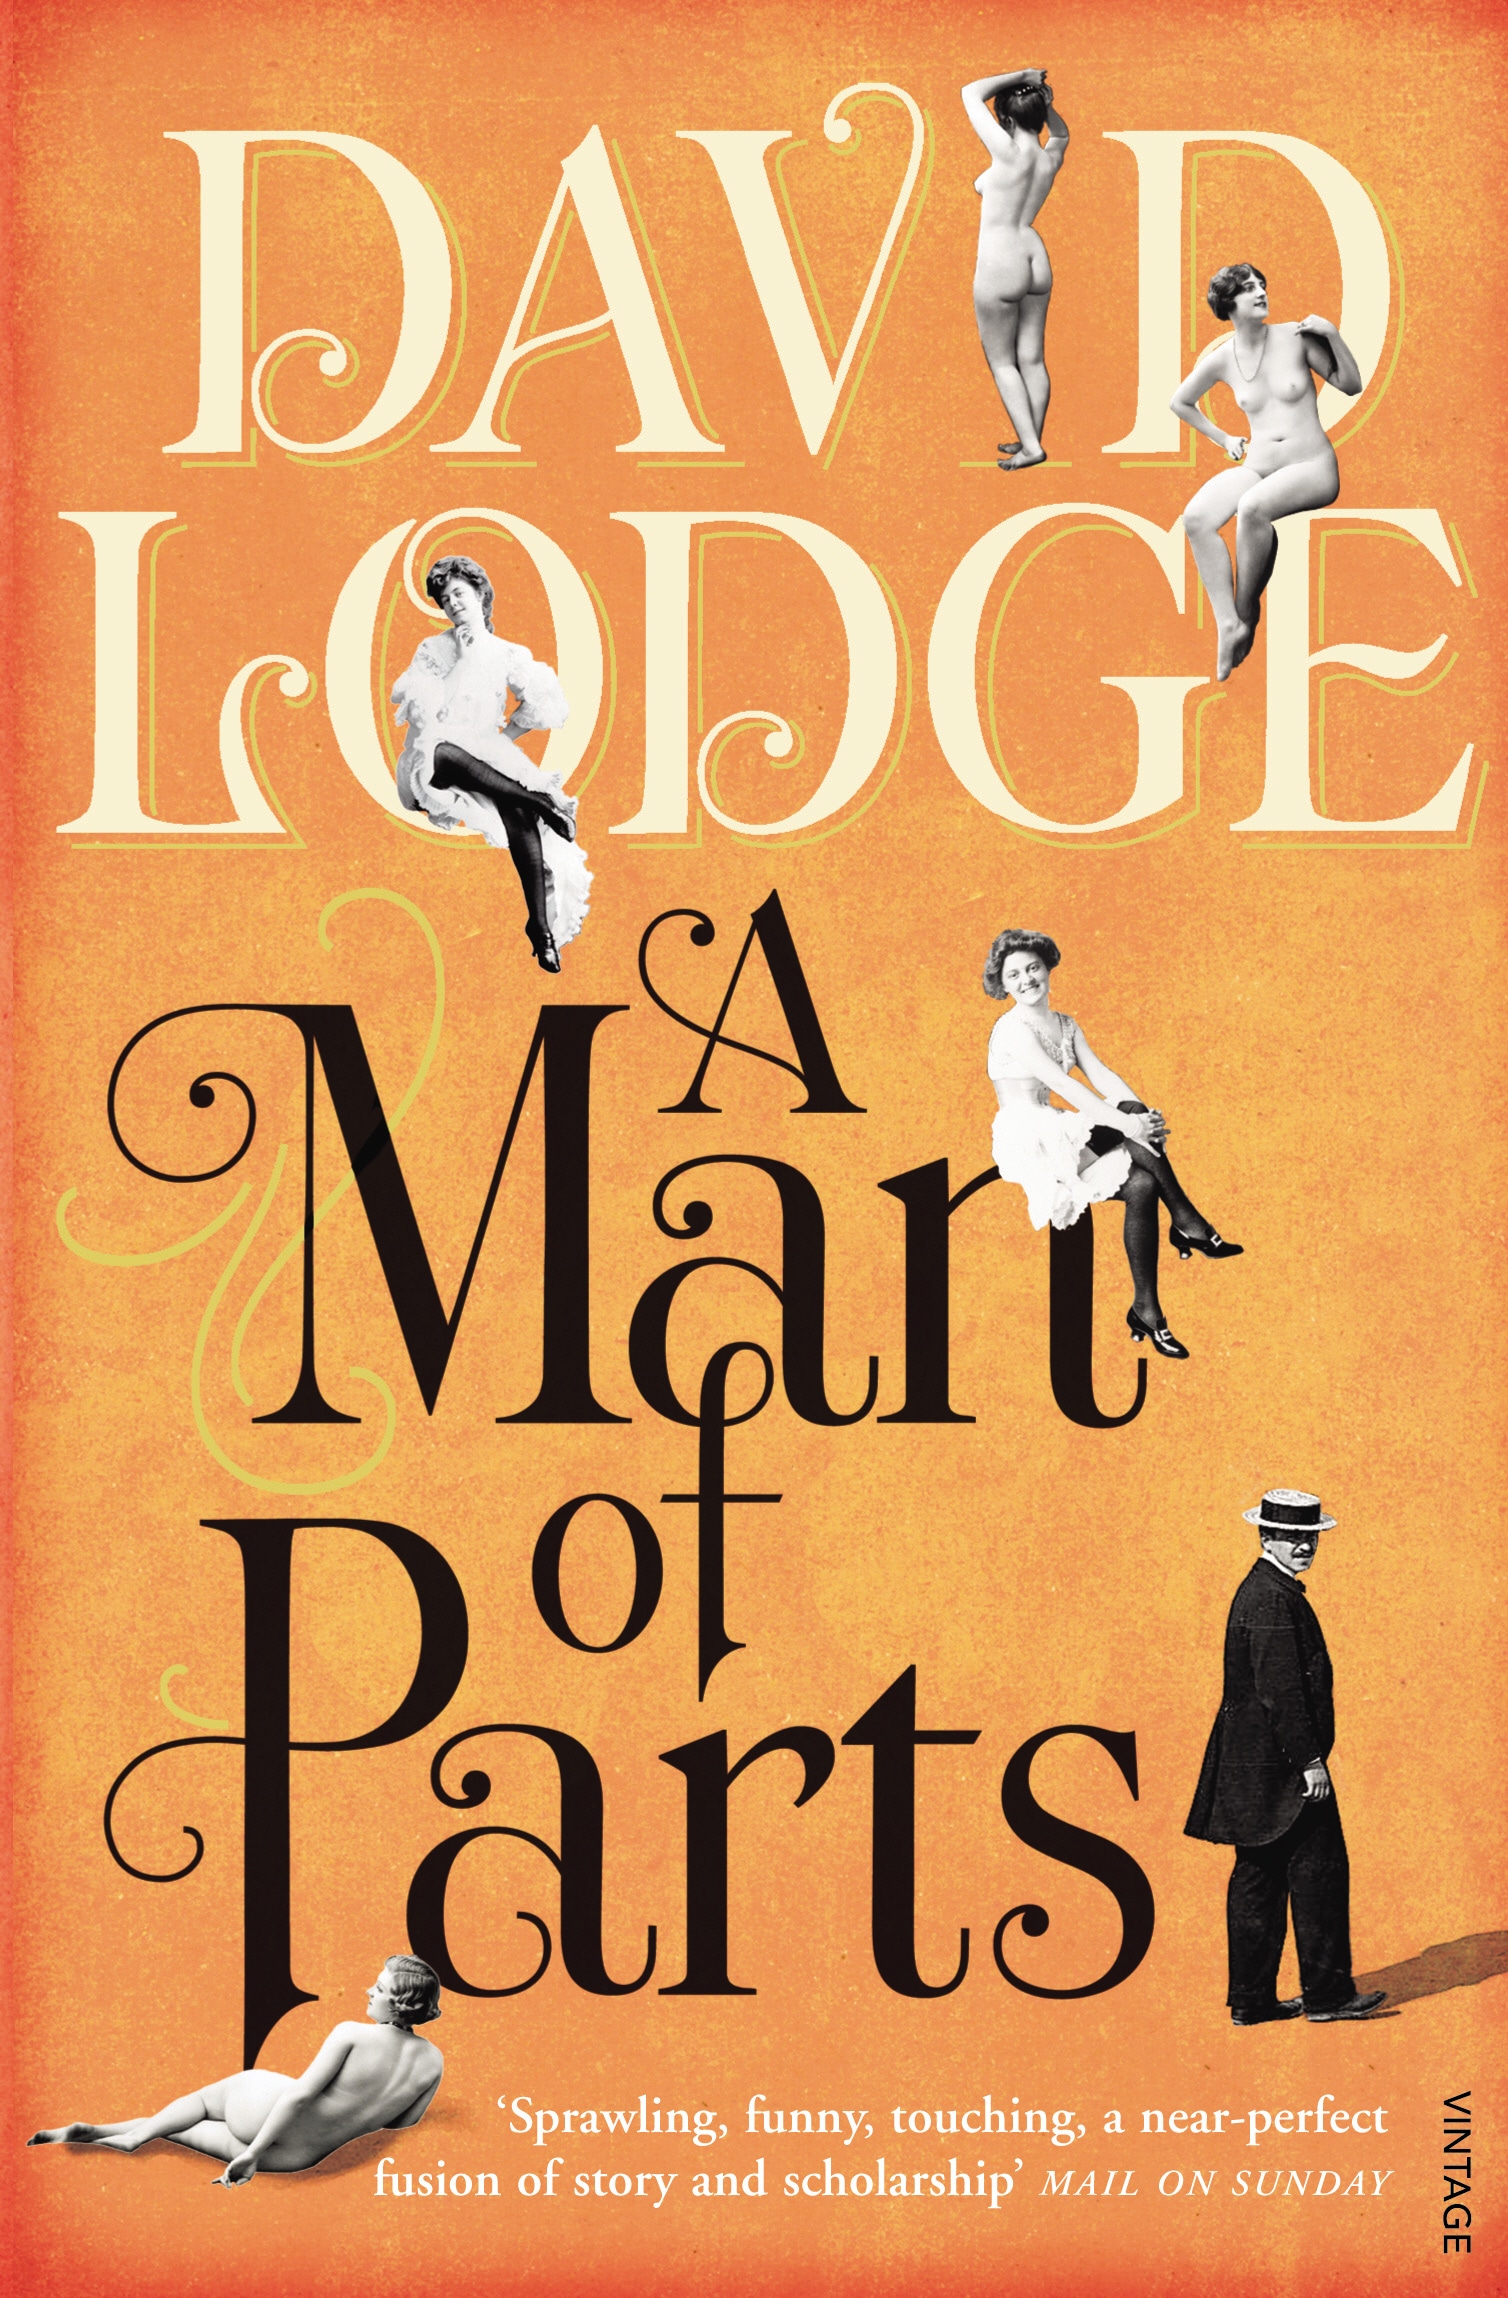 Book “A Man of Parts” by David Lodge — January 12, 2012